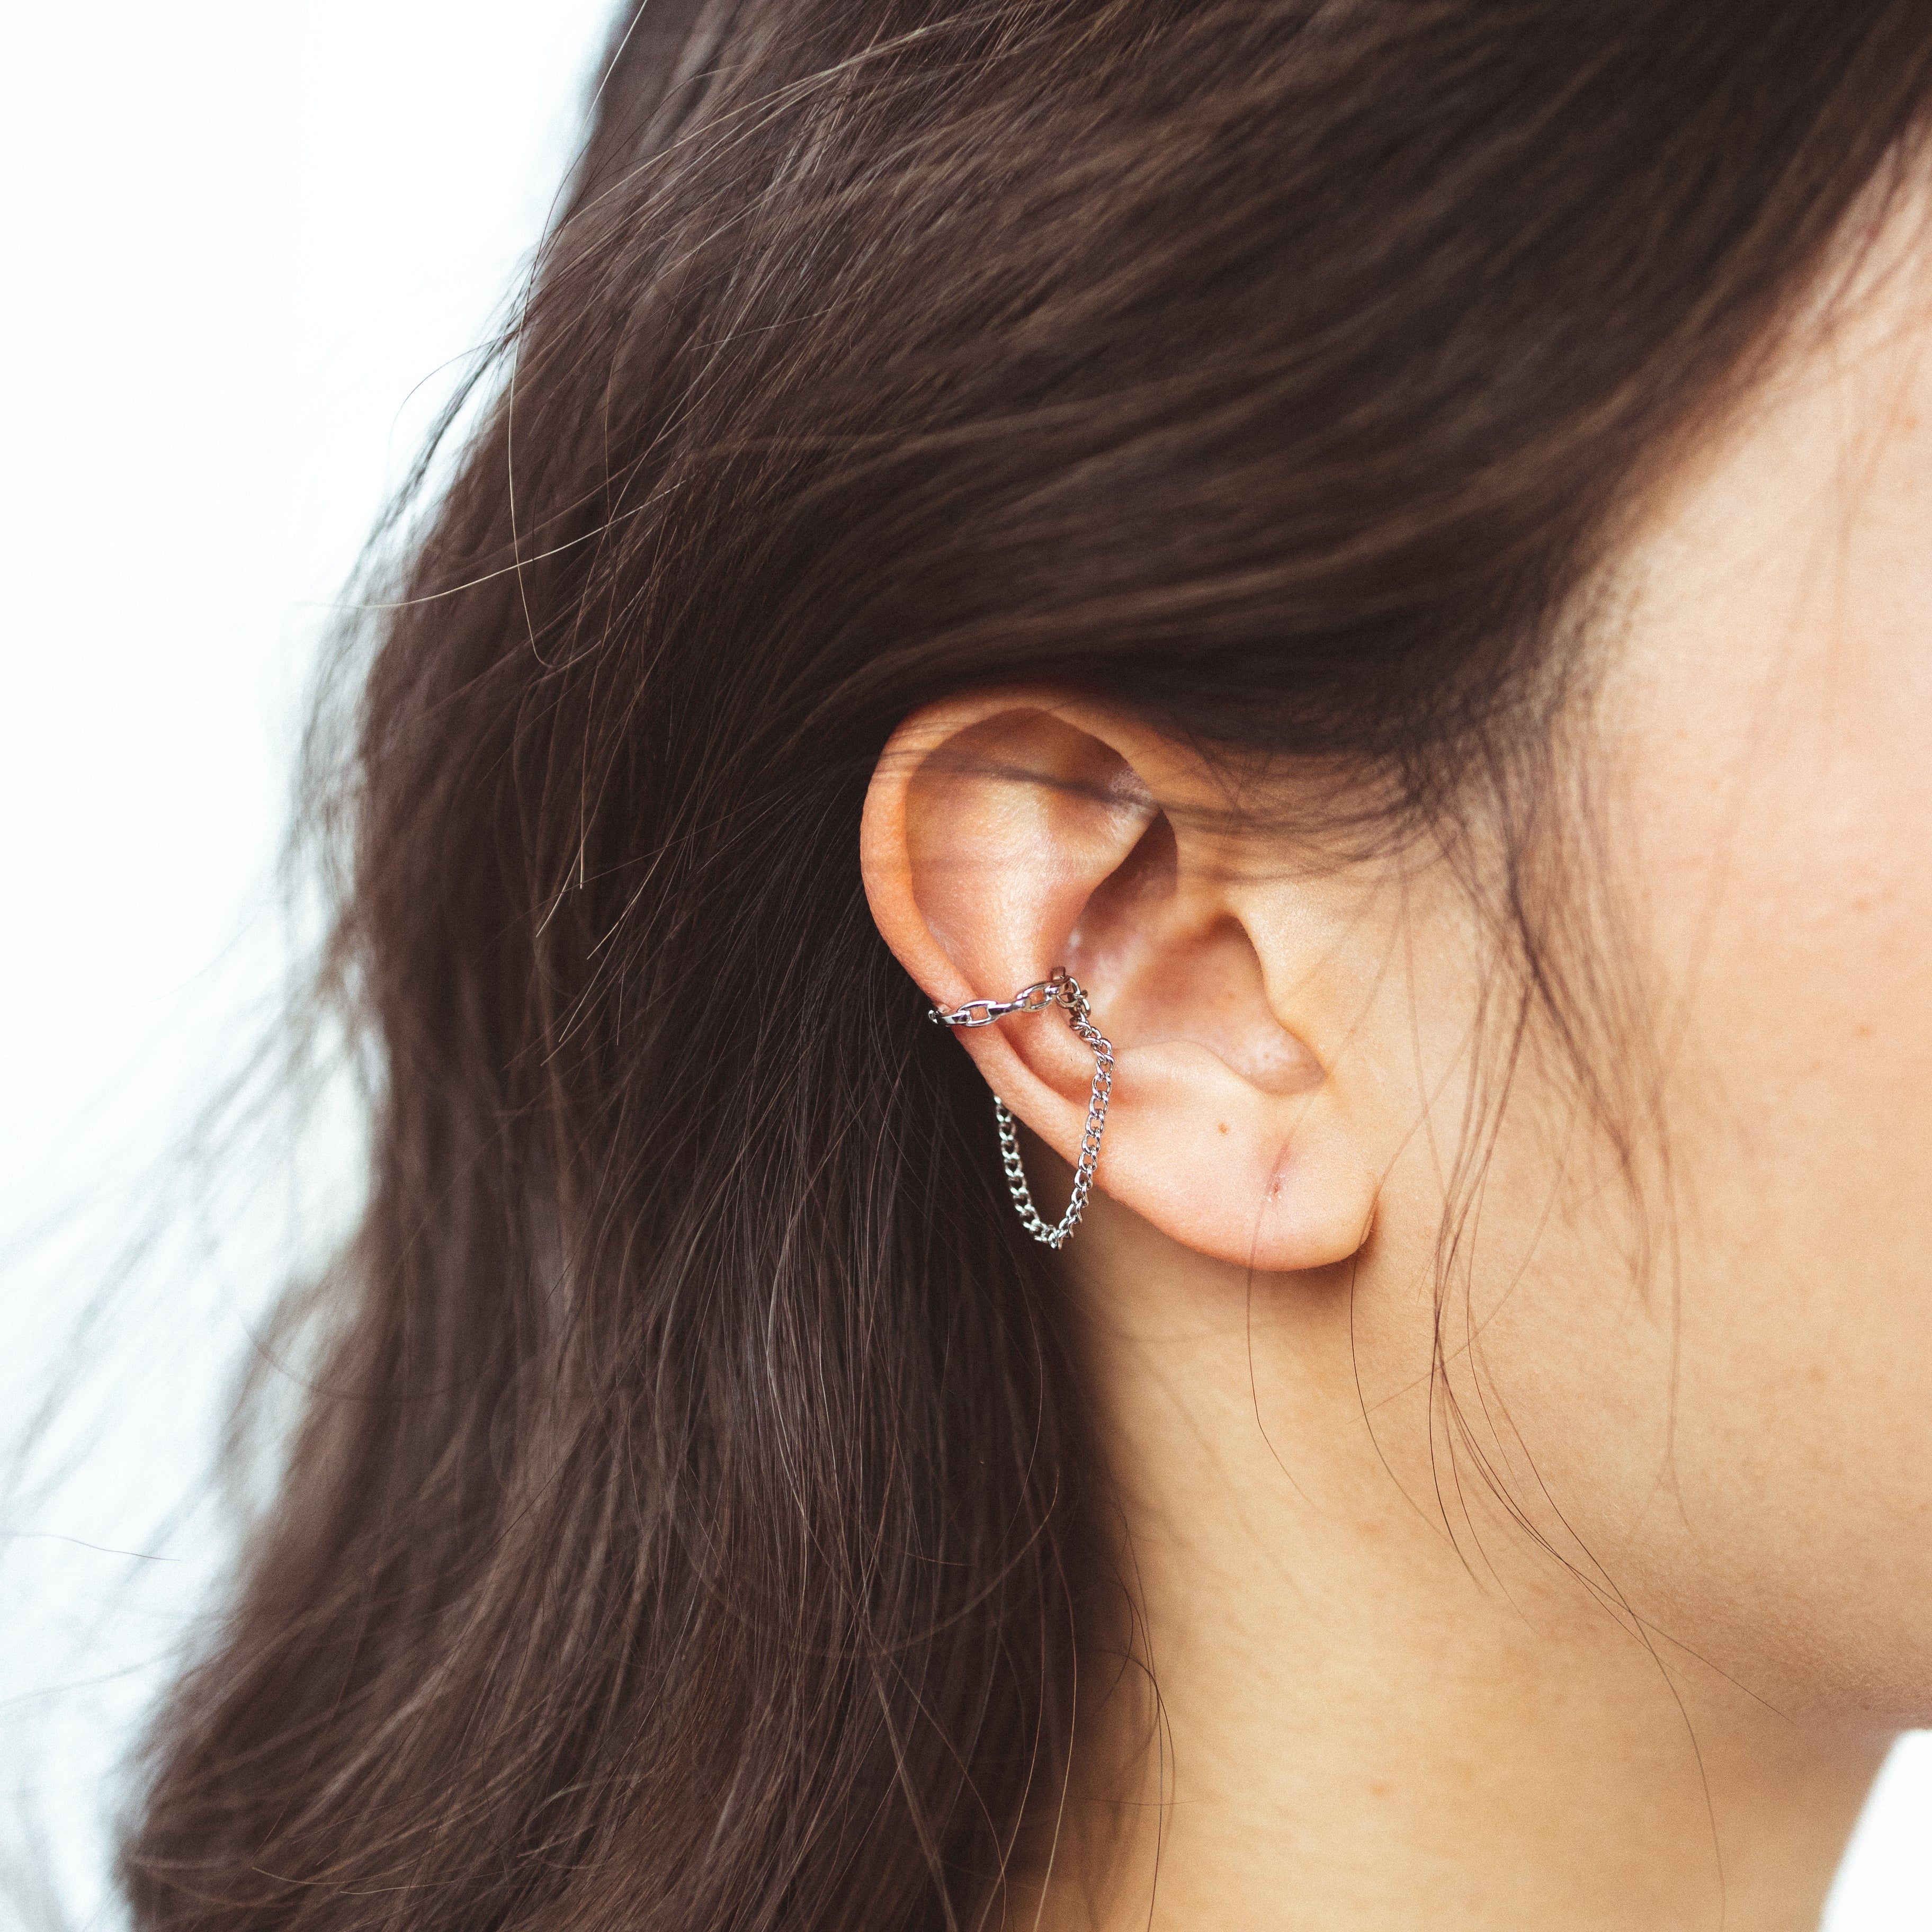 Model Image of a modern Dual Chain Ear Cuff crafted from Goldtone or Silvertone plated zinc alloy. This trendy accessory features a delicate chain, designed to elegantly adorn the earlobe of both men and women.